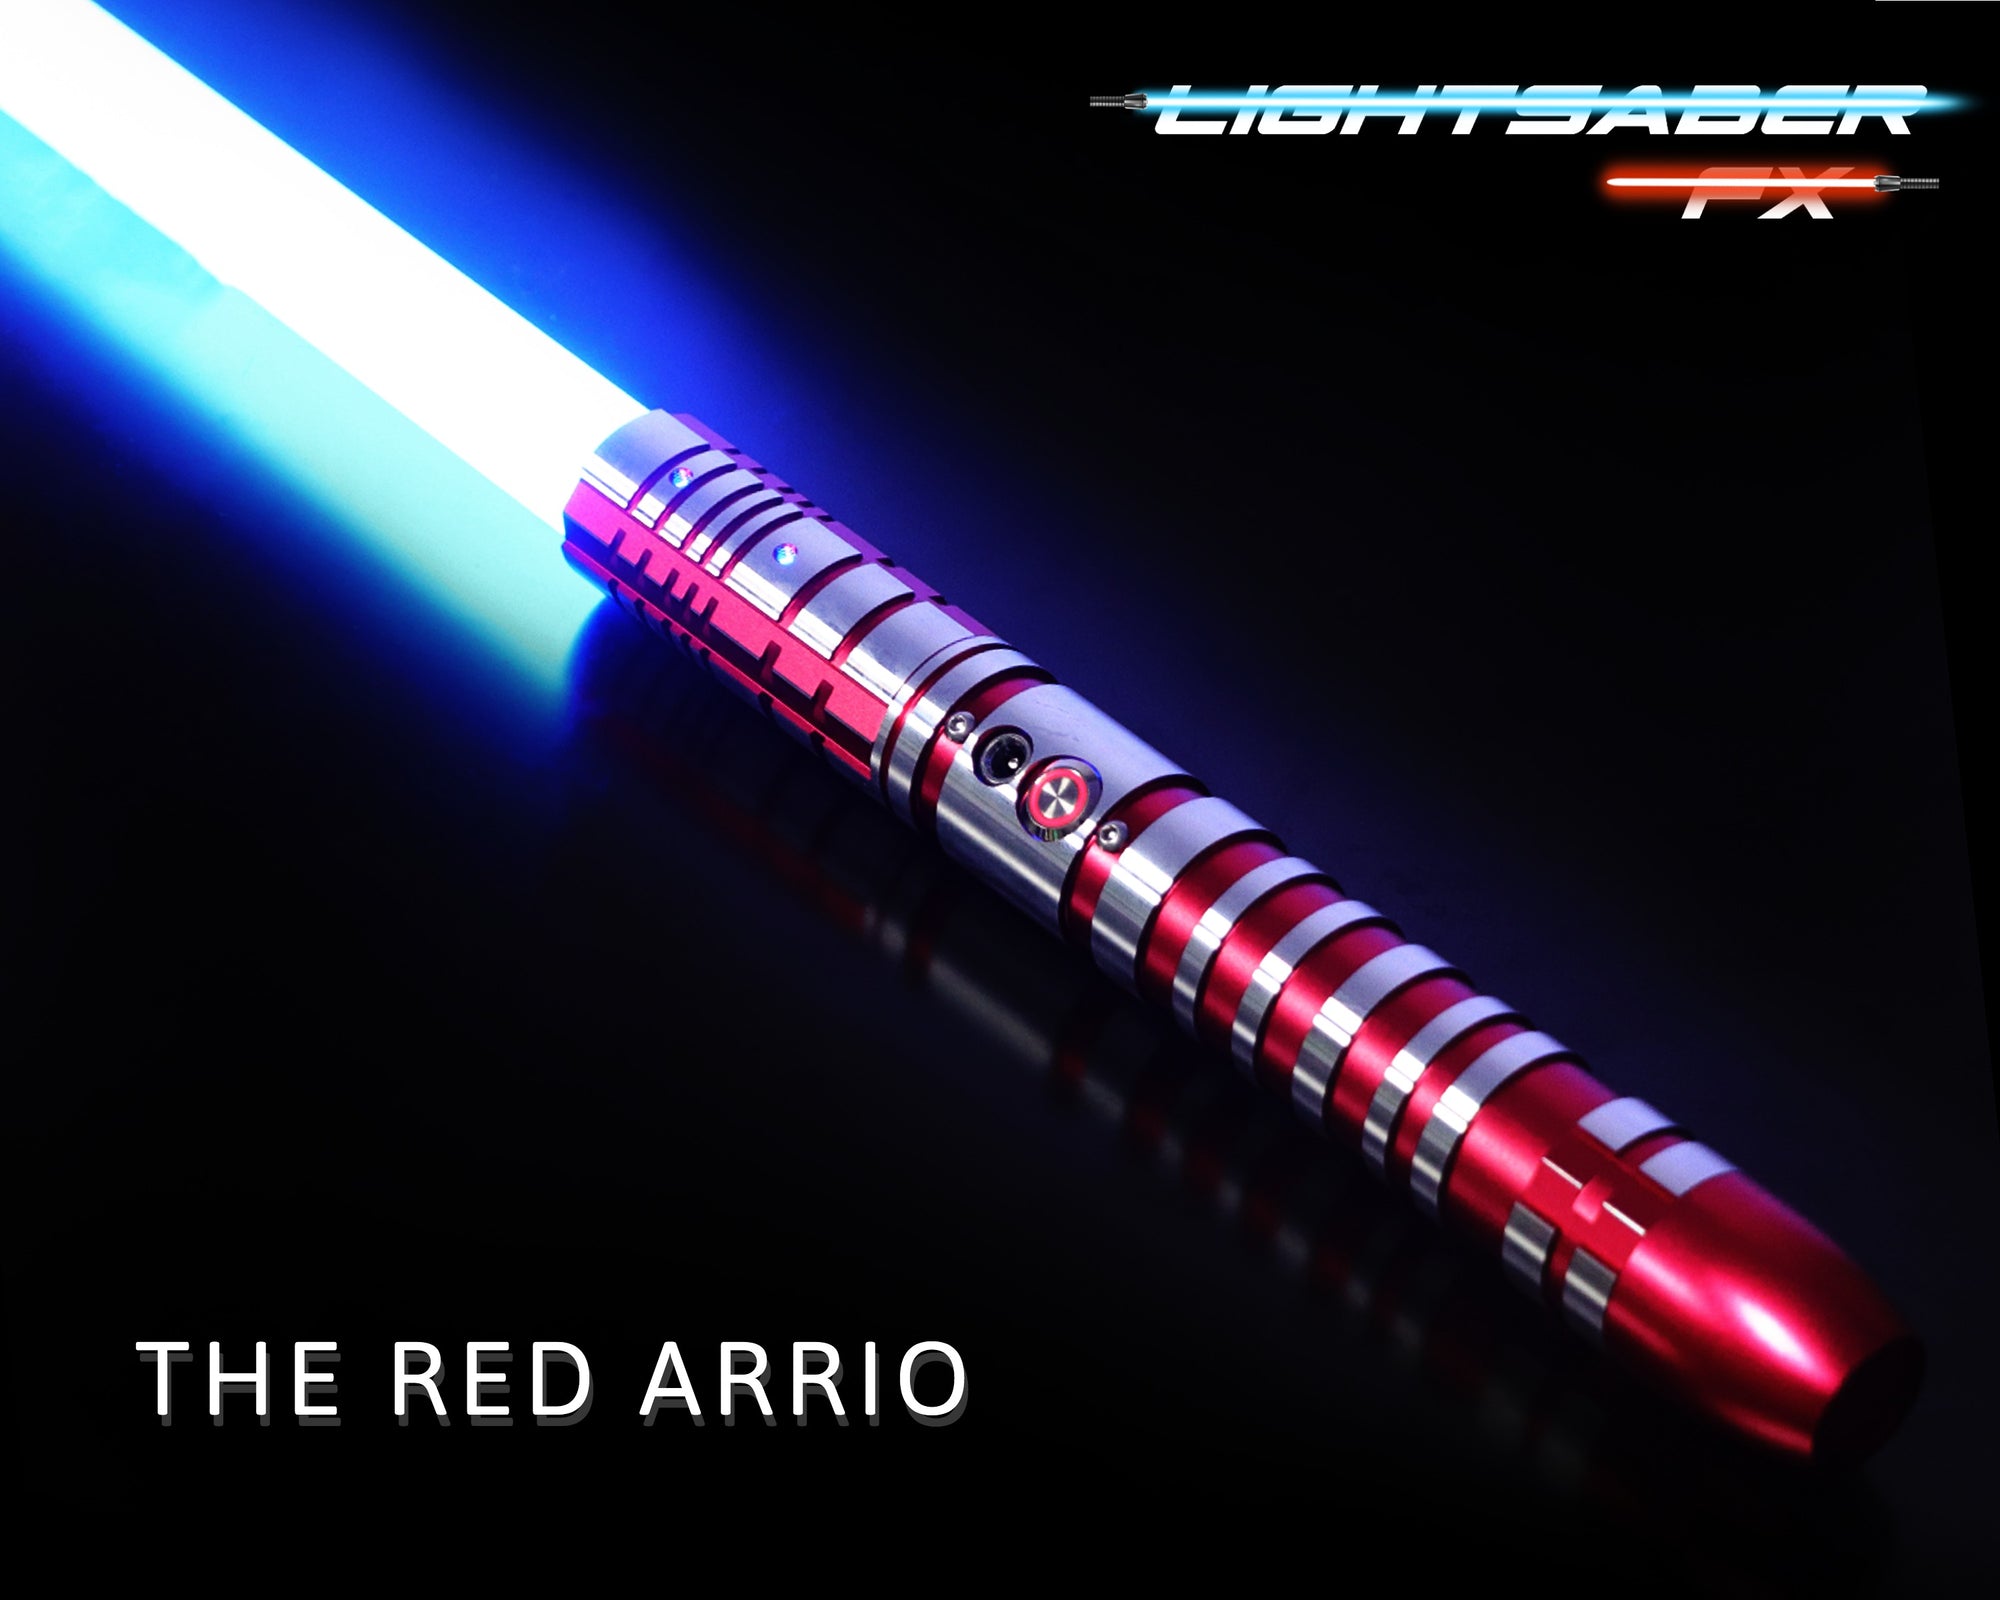 The Red Arrio